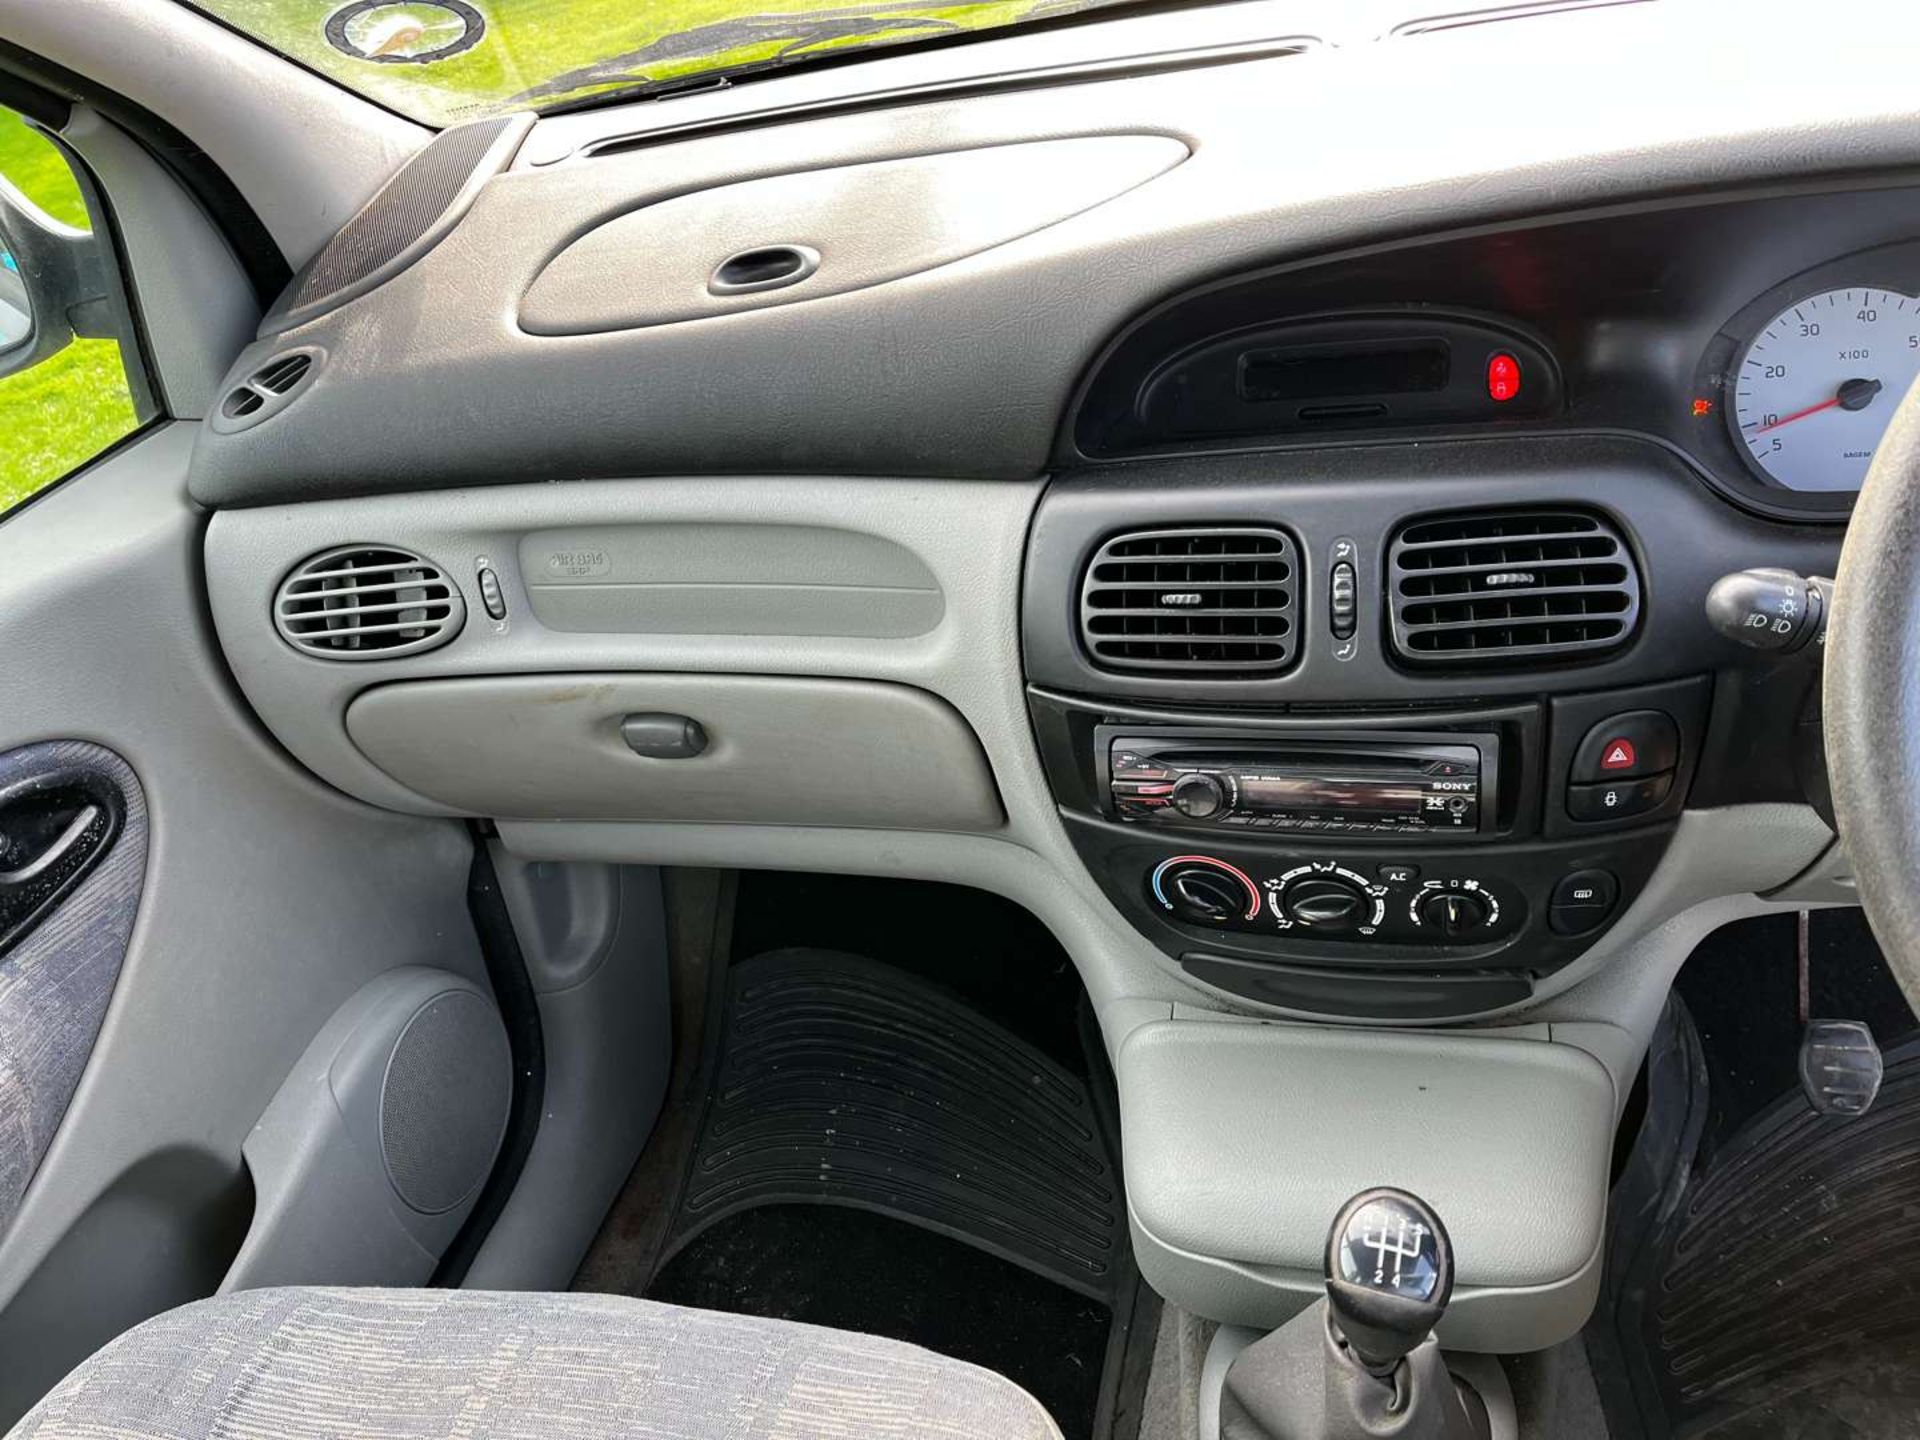 2001 RENAULT MEGANE SCENIC RX4 EXP DCI - Image 20 of 29